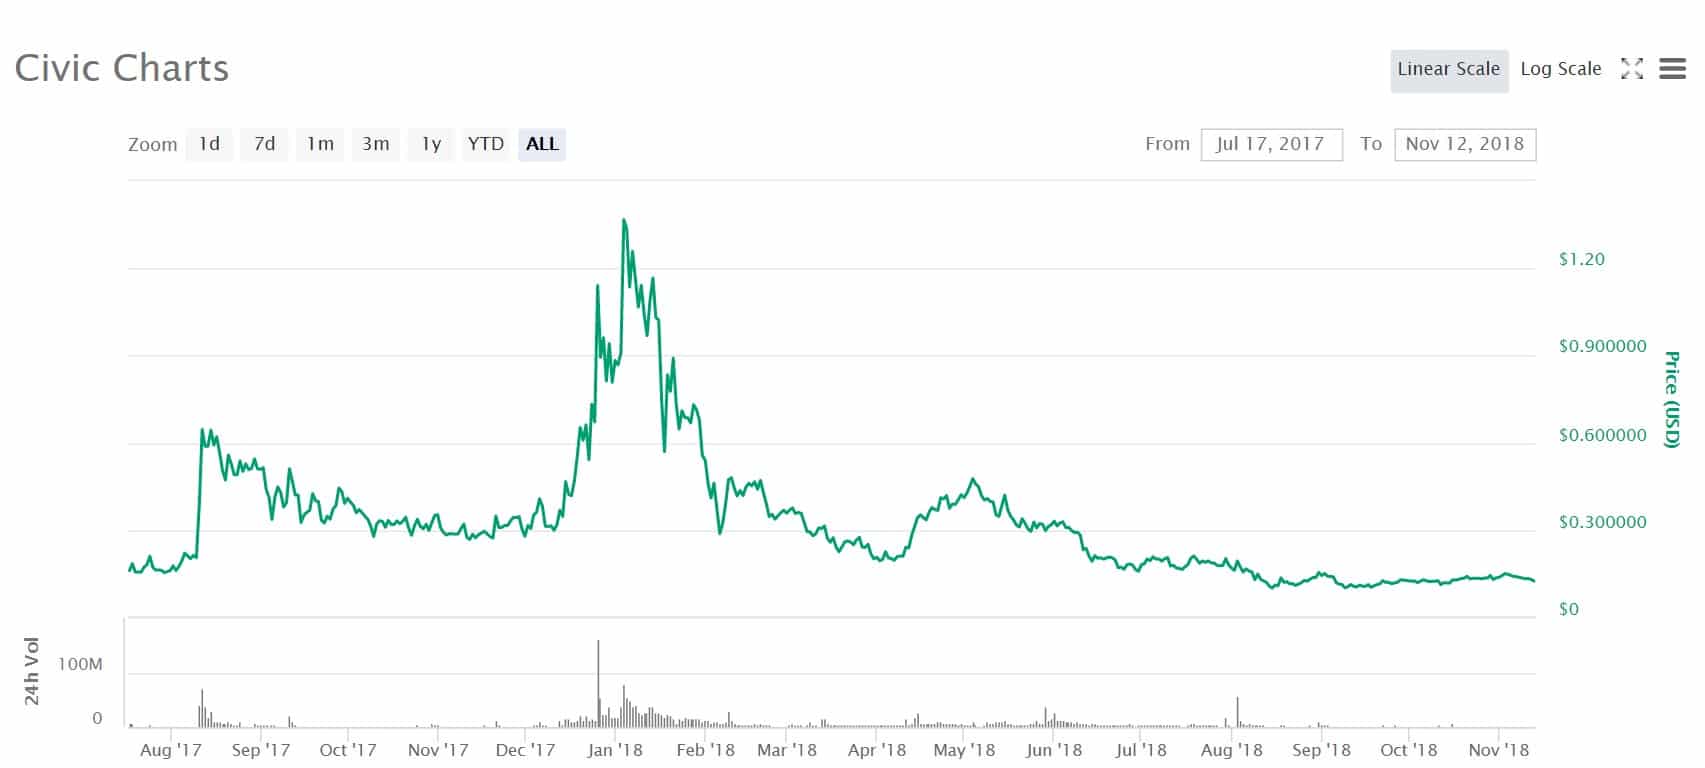 The price for Civic over the last year. Image source: Coinmarketcap